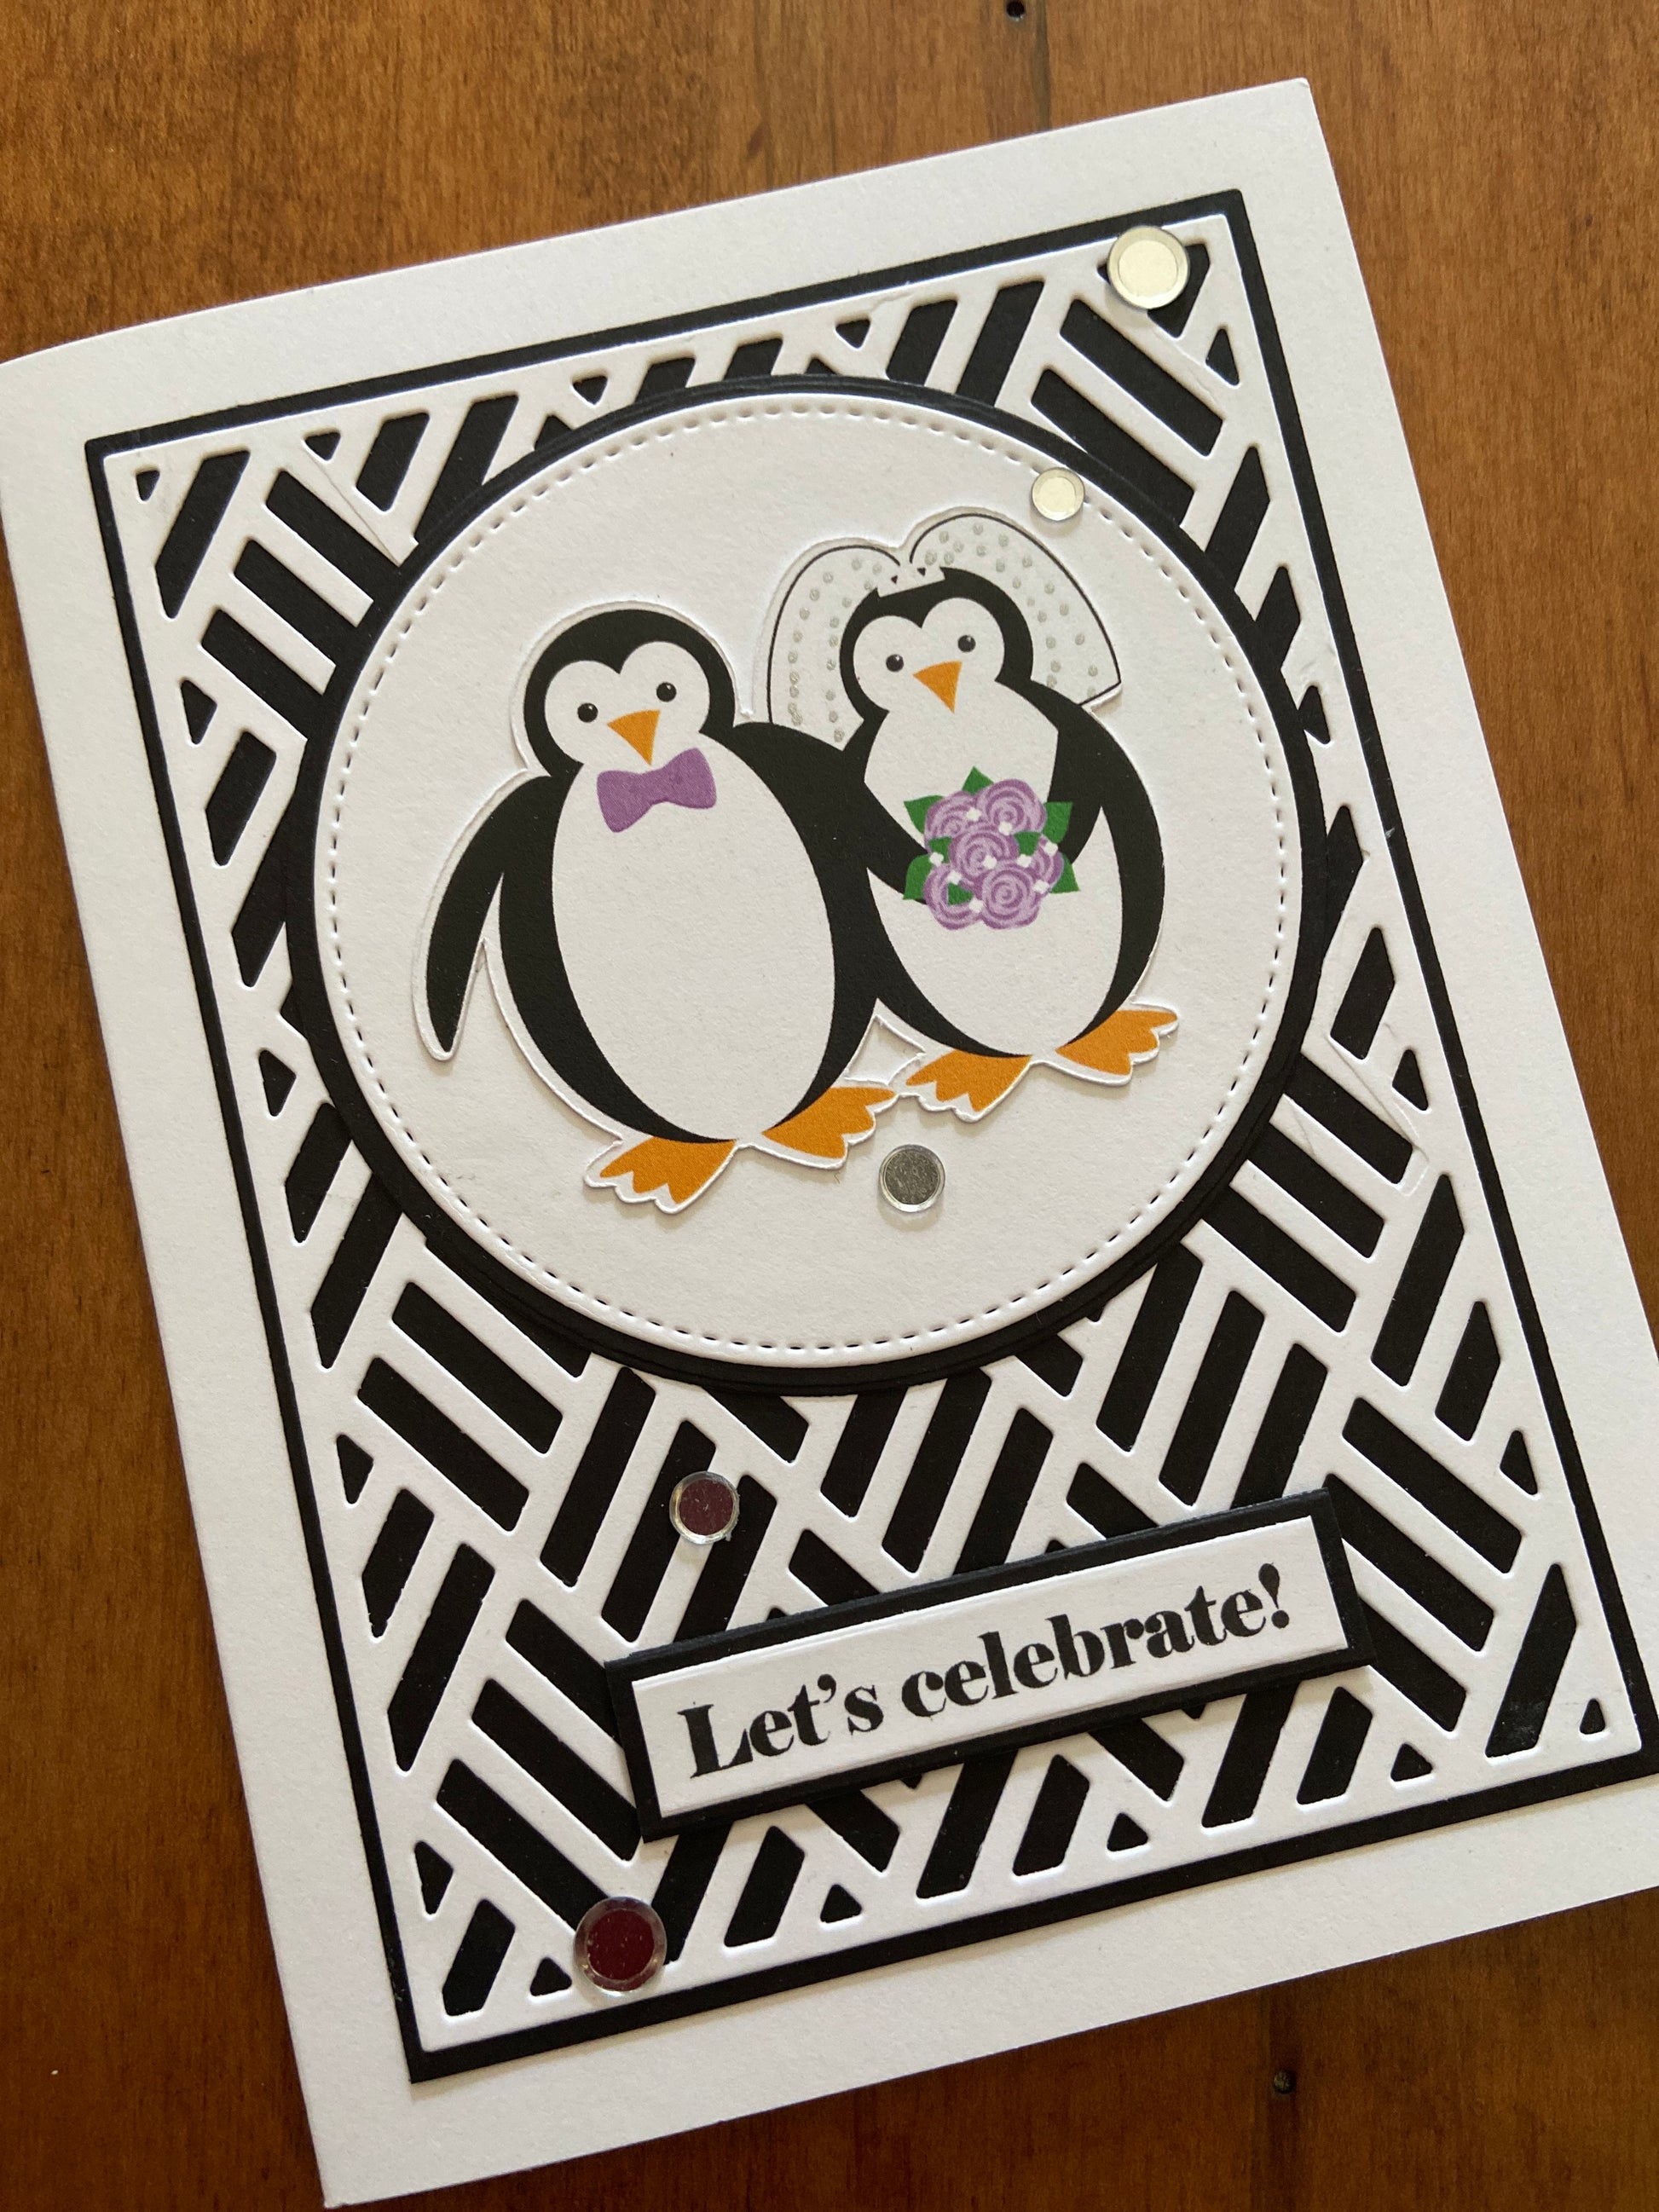 Bold and graphic wedding card with a white die cut basket-weave over black background. A cute penguin bride and groom as a focal point, a “let’s celebrate” sentiment strip with a little bling here and there for sparkle.